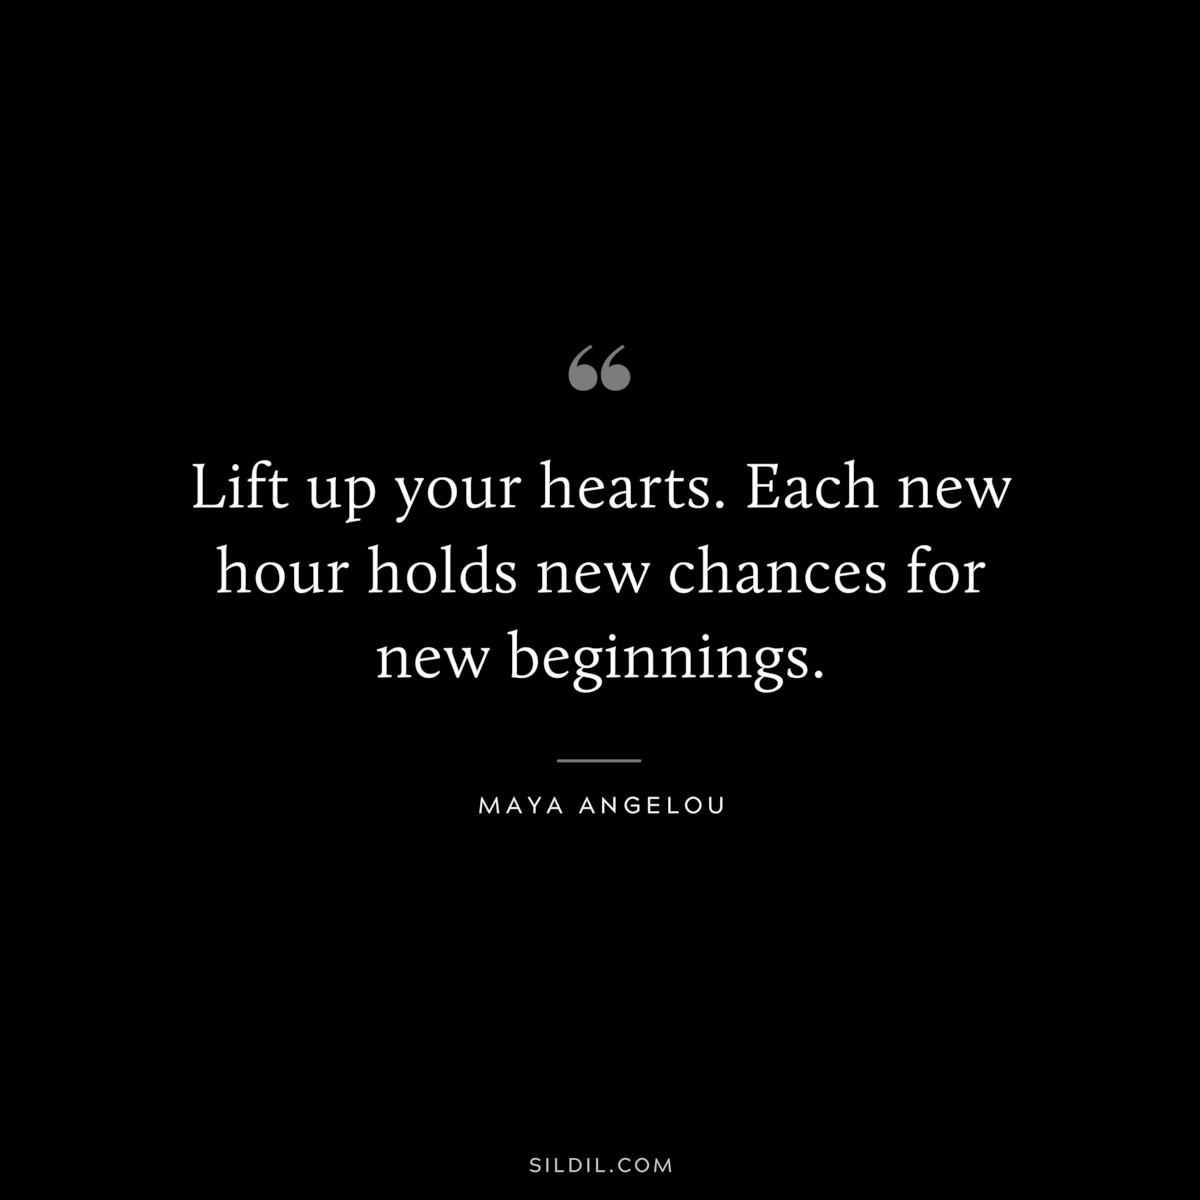 Lift up your hearts. Each new hour holds new chances for new beginnings. ― Maya Angelou